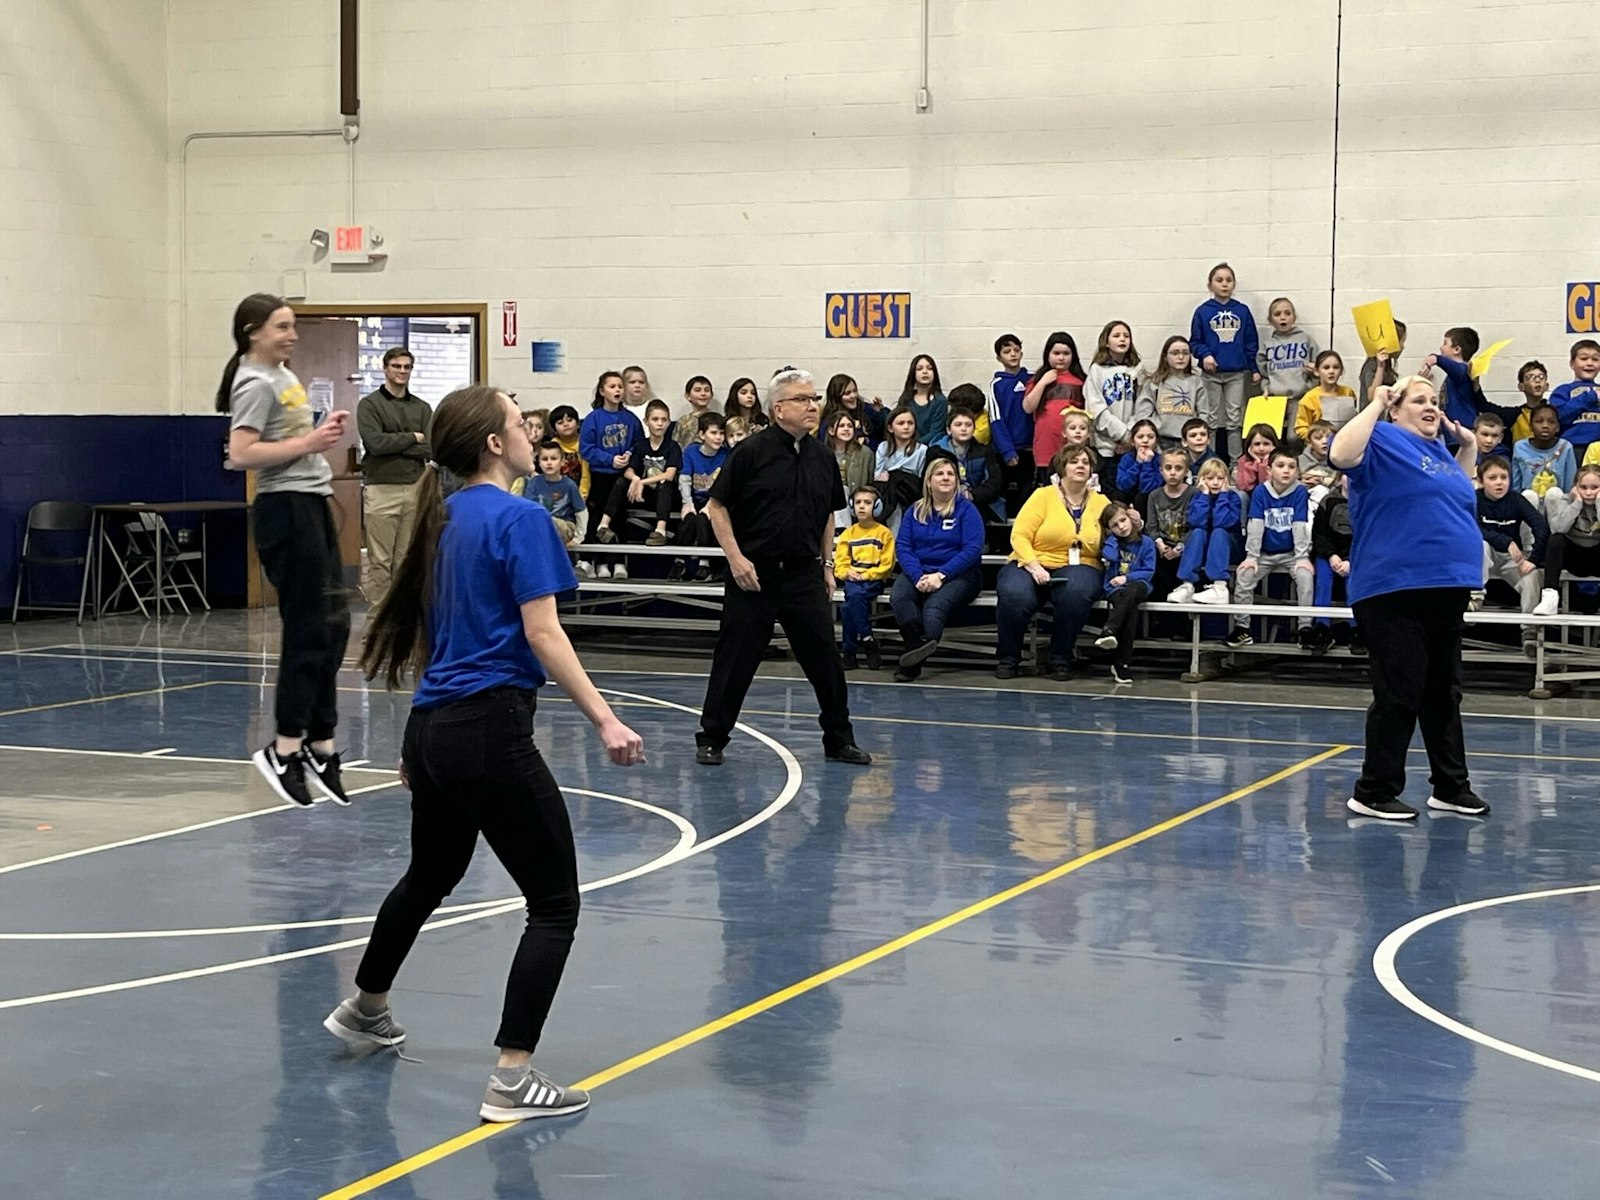 Bishop Monforton waits for a serve as he participates in a game of volleyball with students and teachers at Bishop Mussio Grade School and Junior High in Steubenville during Catholic Schools Week earlier this year.